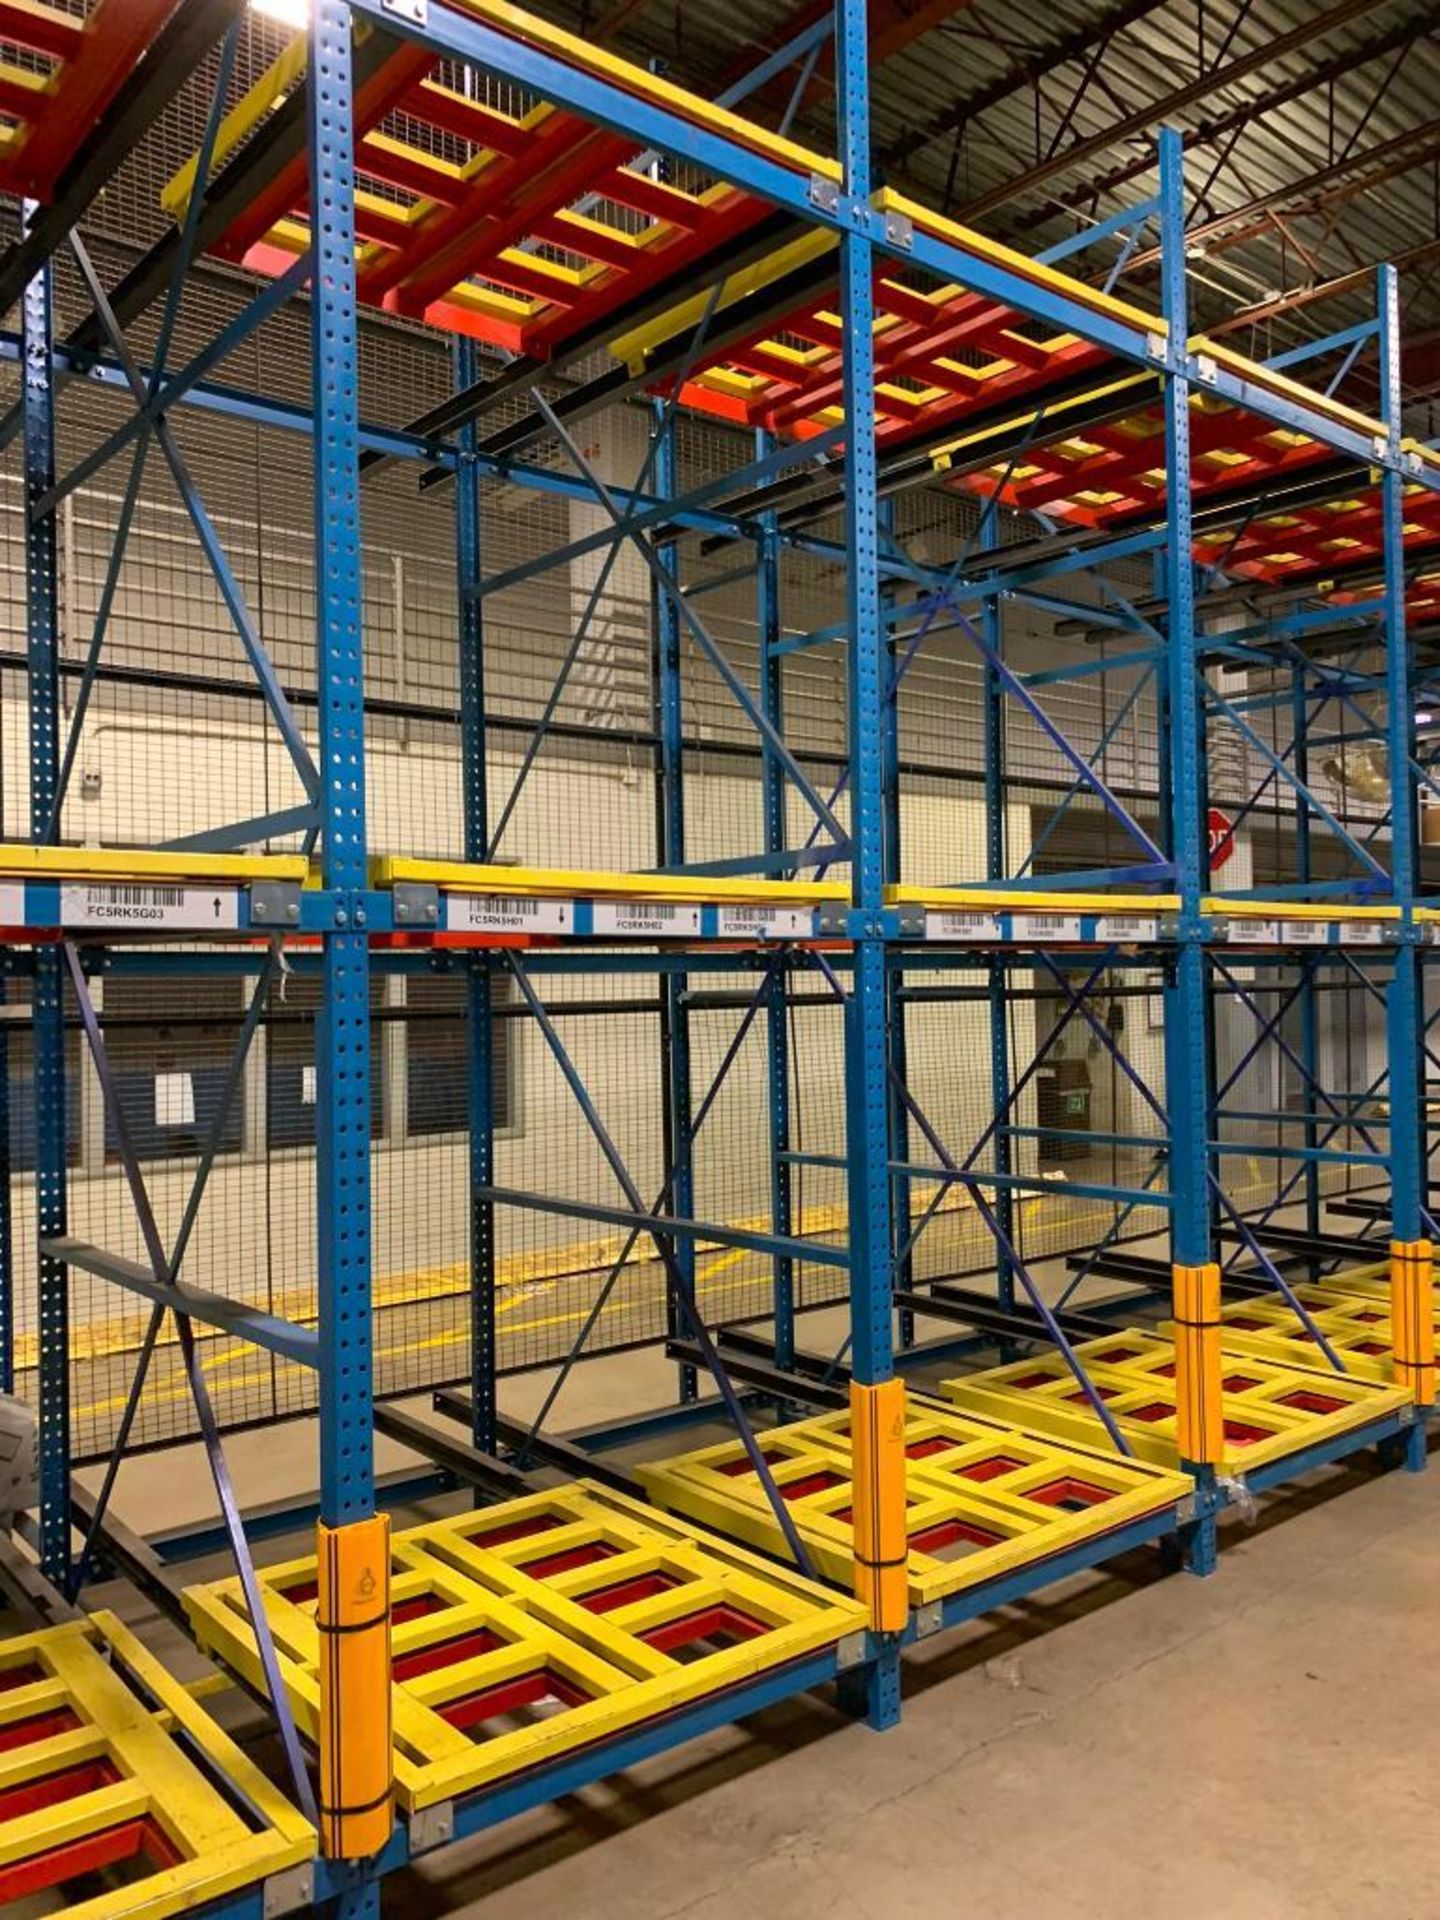 (12x) Bays of Bolt-Together Push-Back Pallet Rack; 15' T X 104" D, Each Bay Has (6) Pallet Positions - Image 4 of 12